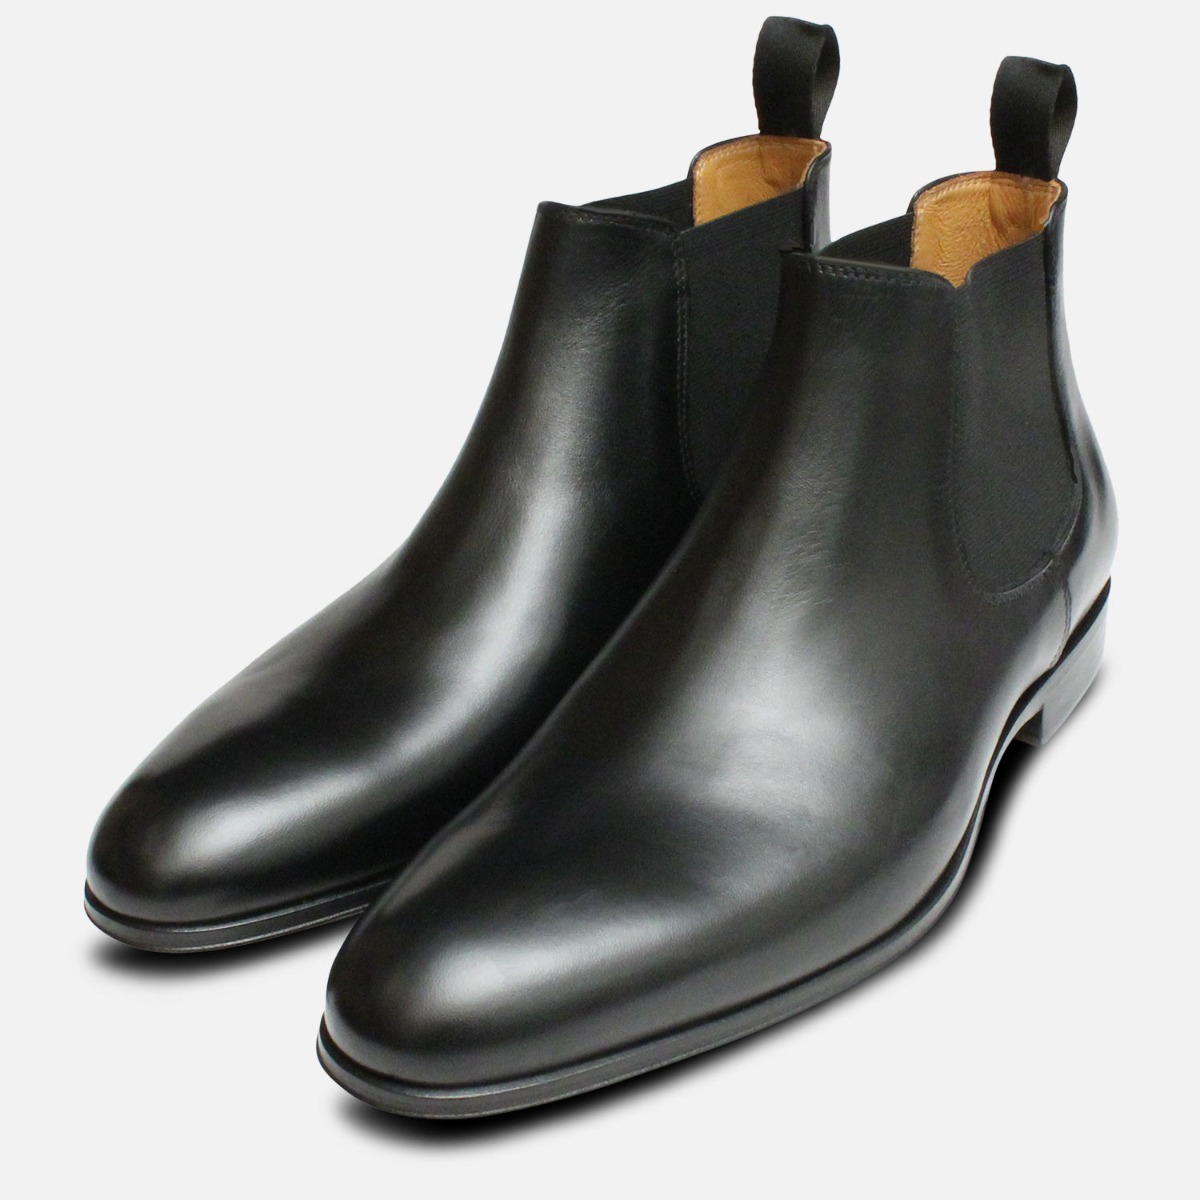 Black Beatle Boots for Men by Arthur Knight Shoes | eBay